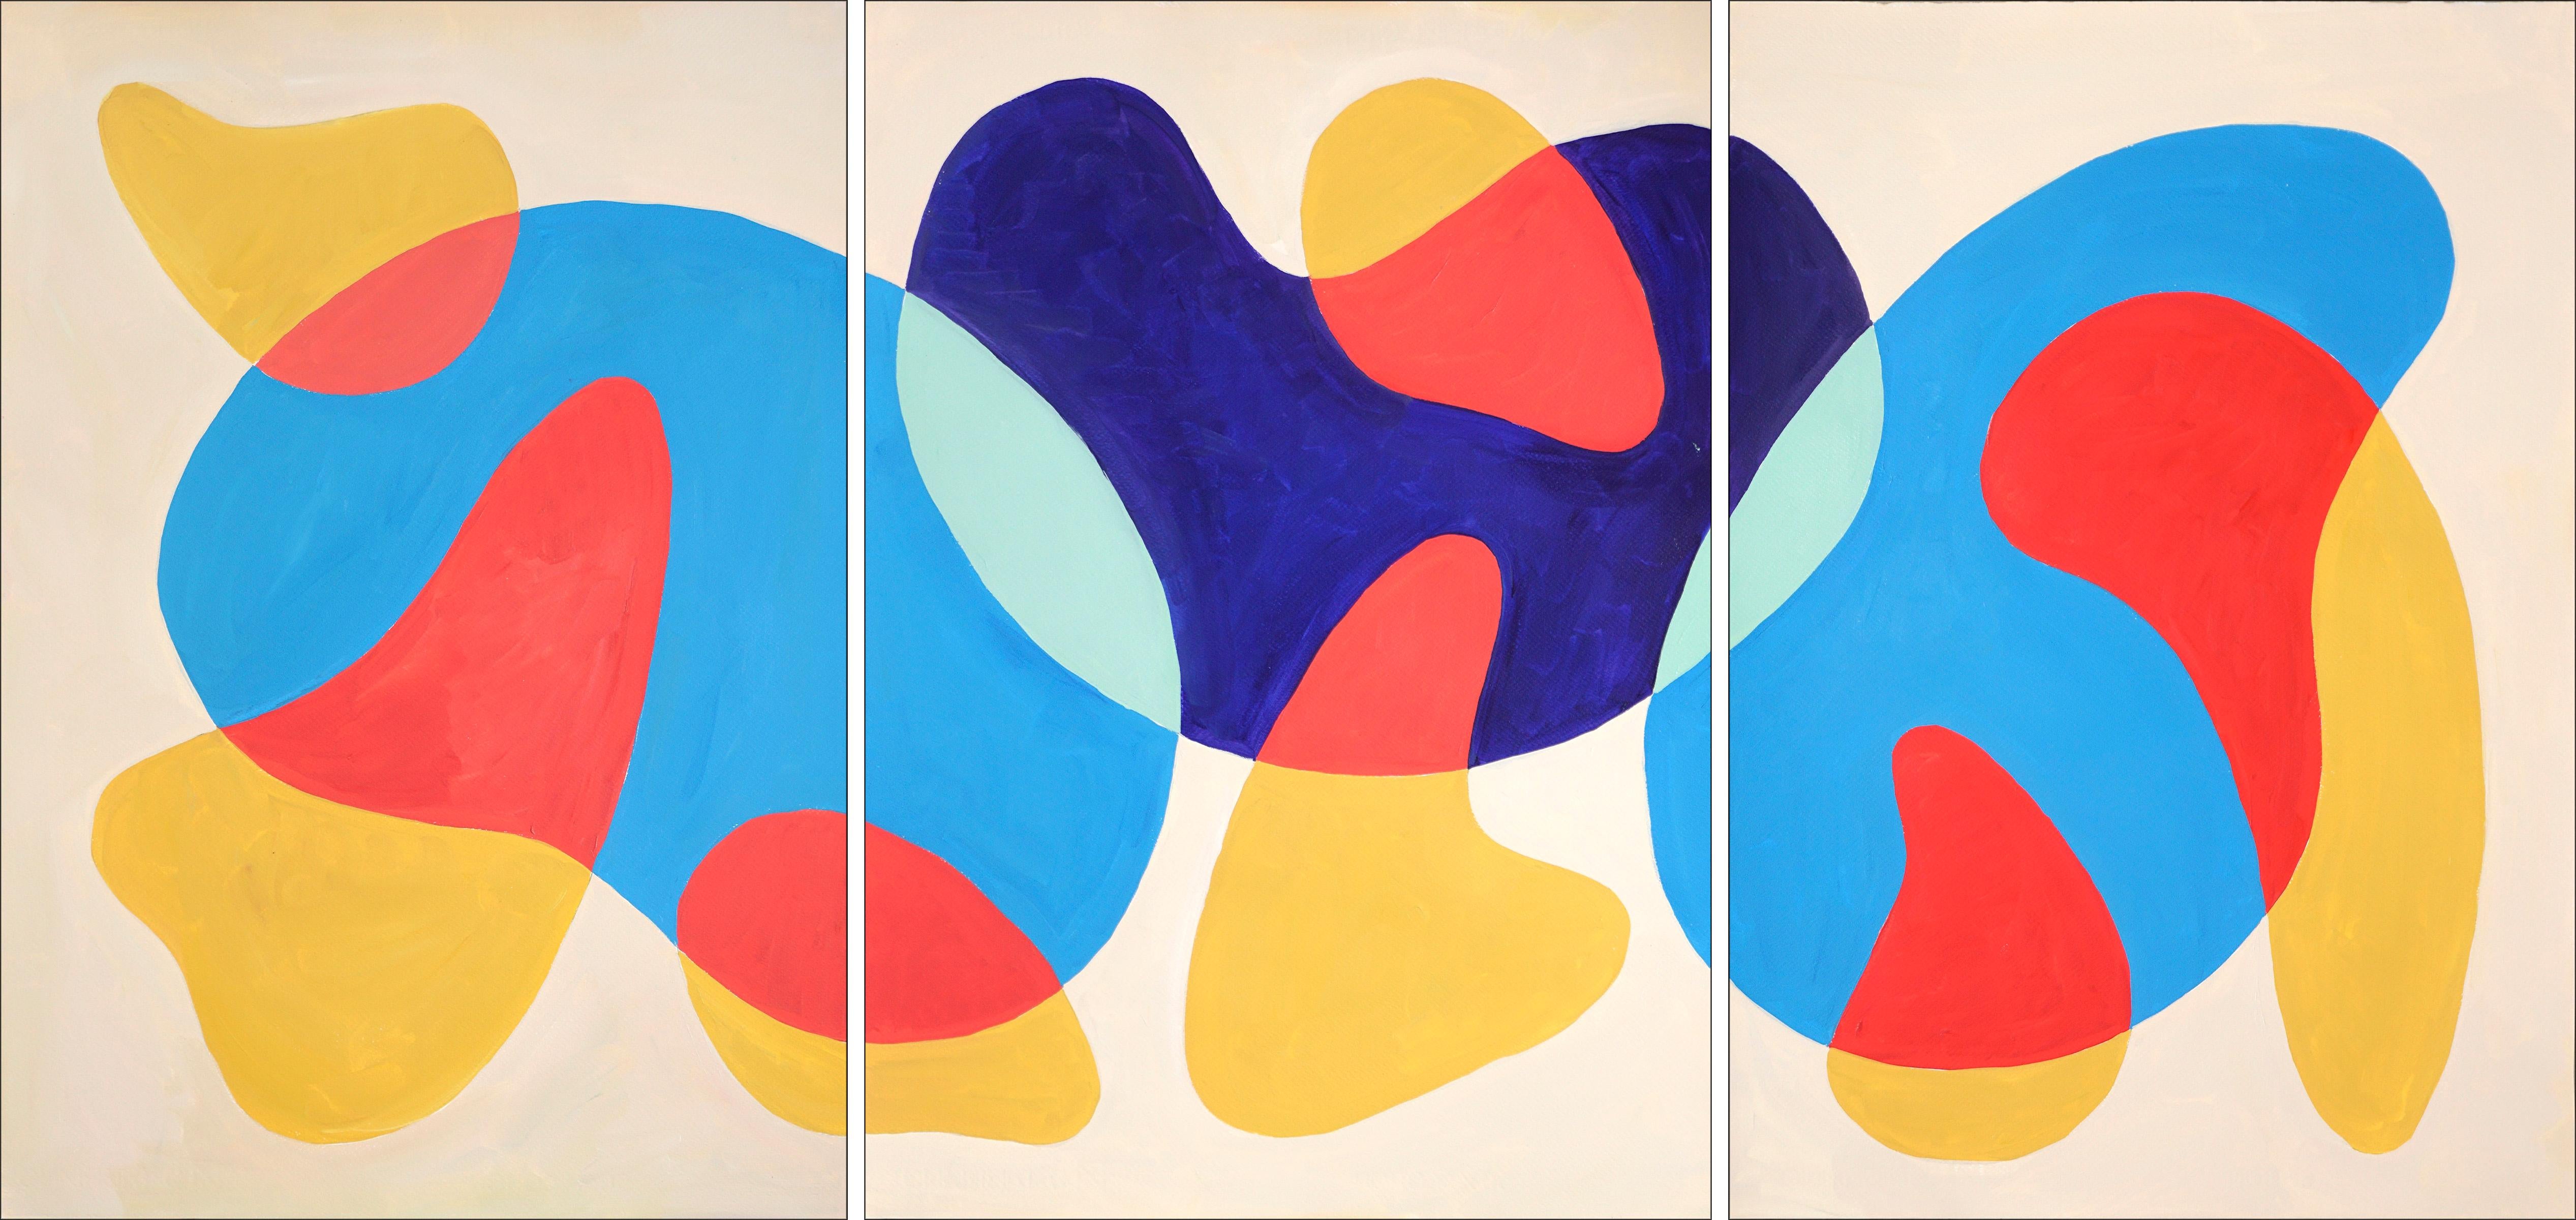 Ryan Rivadeneyra Abstract Painting - Swimming Pools in The Desert, Abstract Modern Shapes in Primary Tones, Triptych